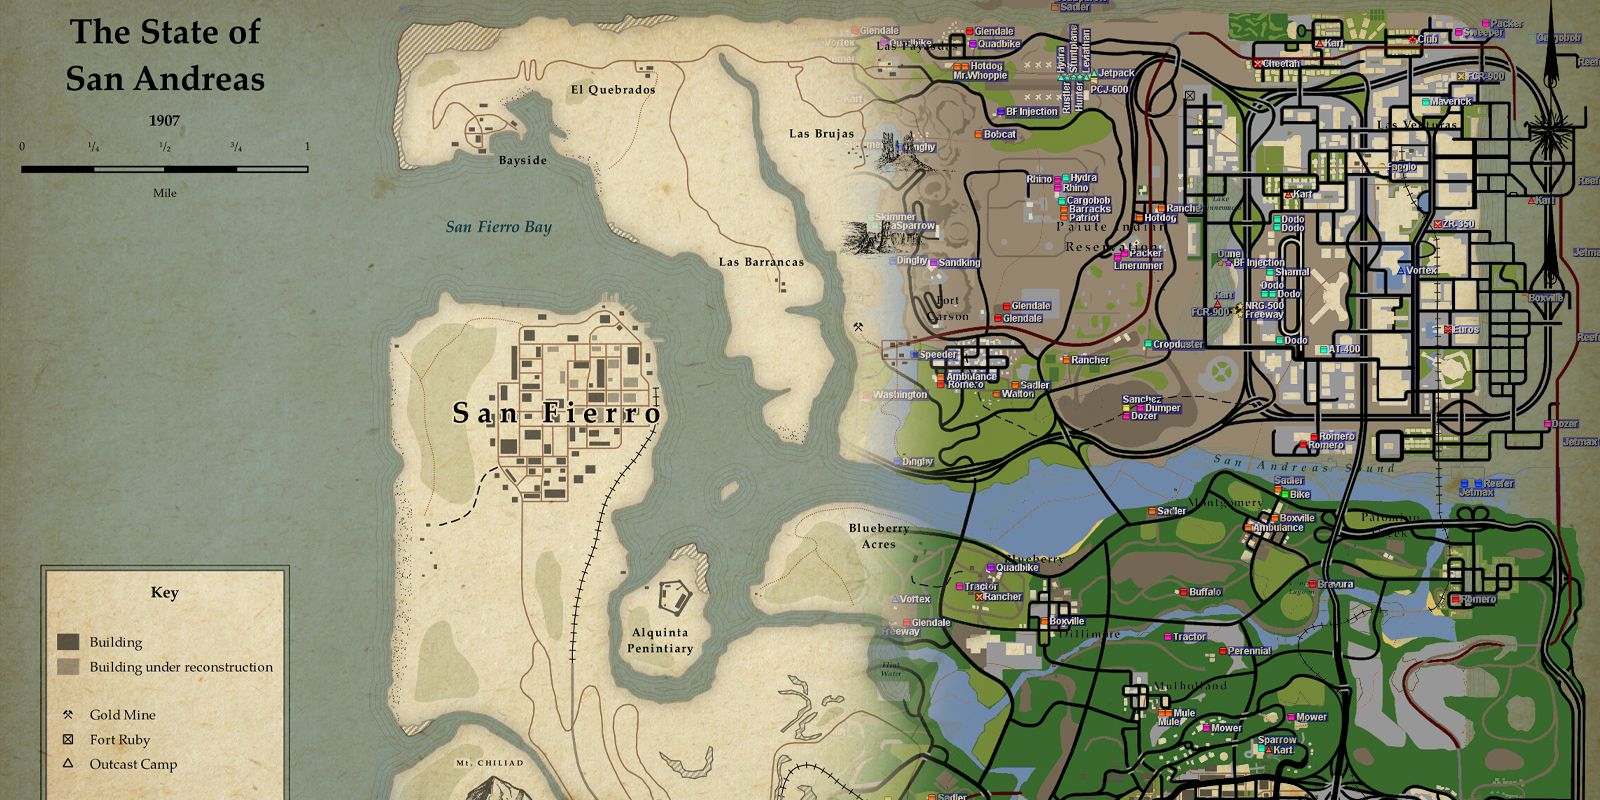 Grand Theft Auto Map predicts San Andreas in 1907